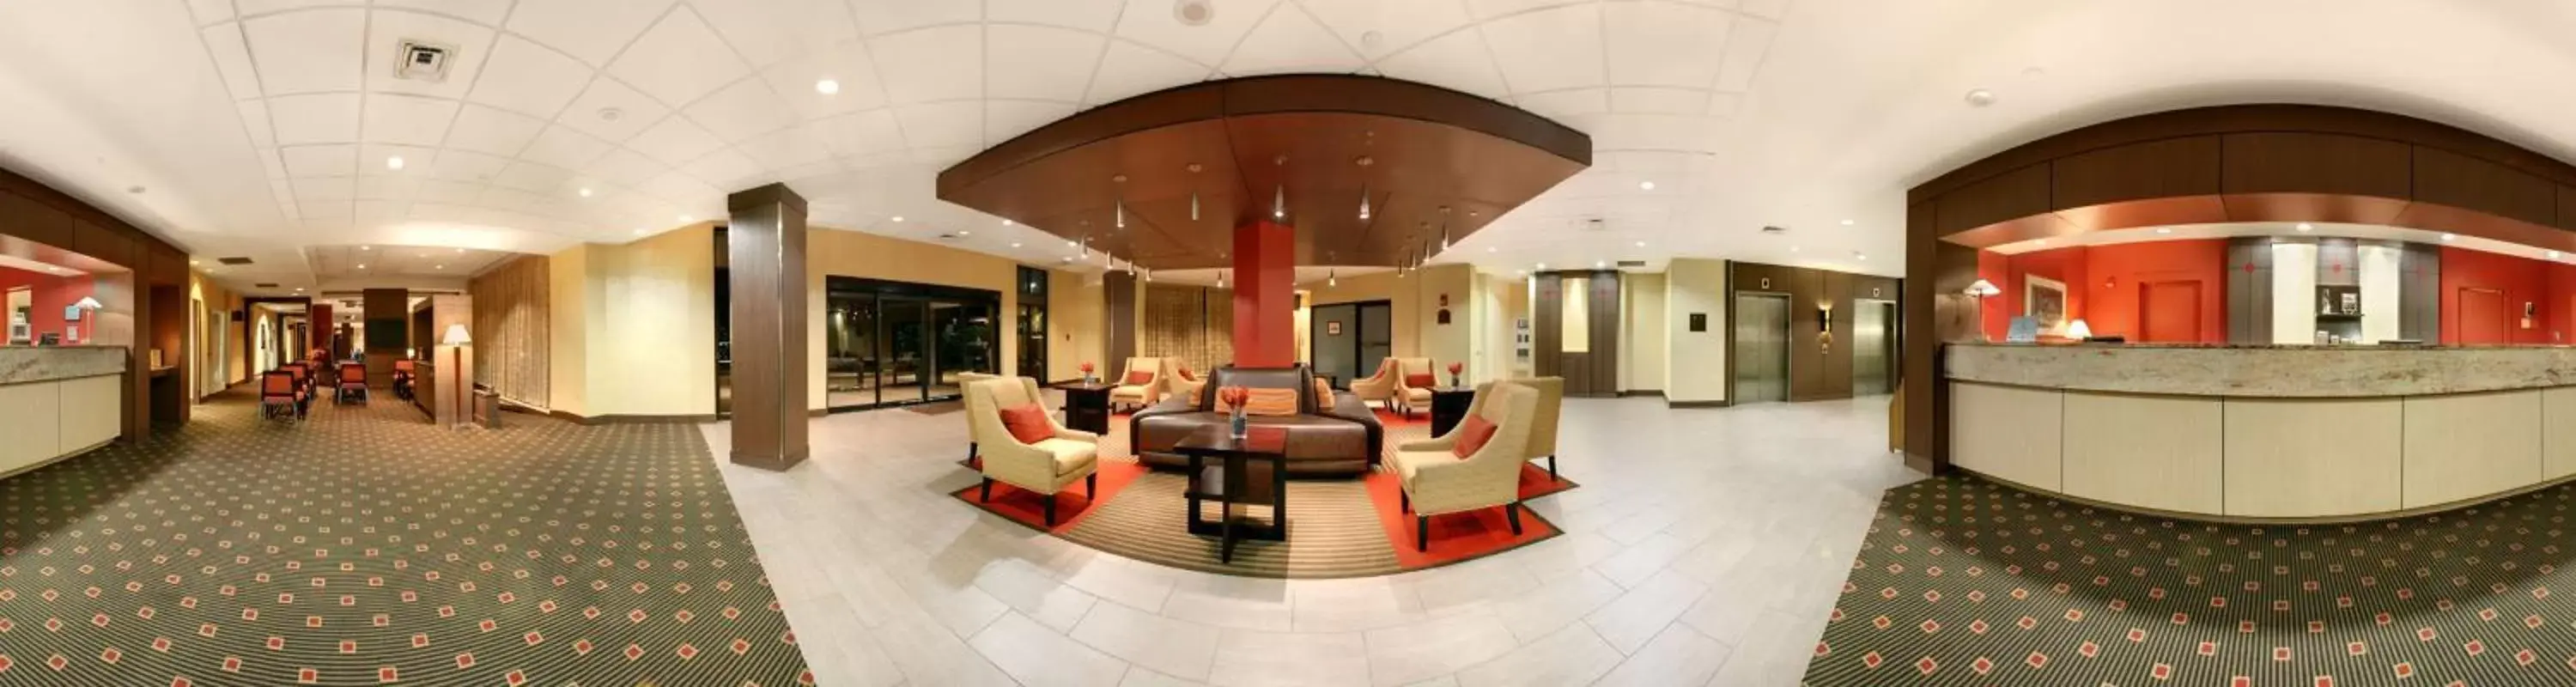 Lobby or reception in DoubleTree by Hilton Bradley International Airport